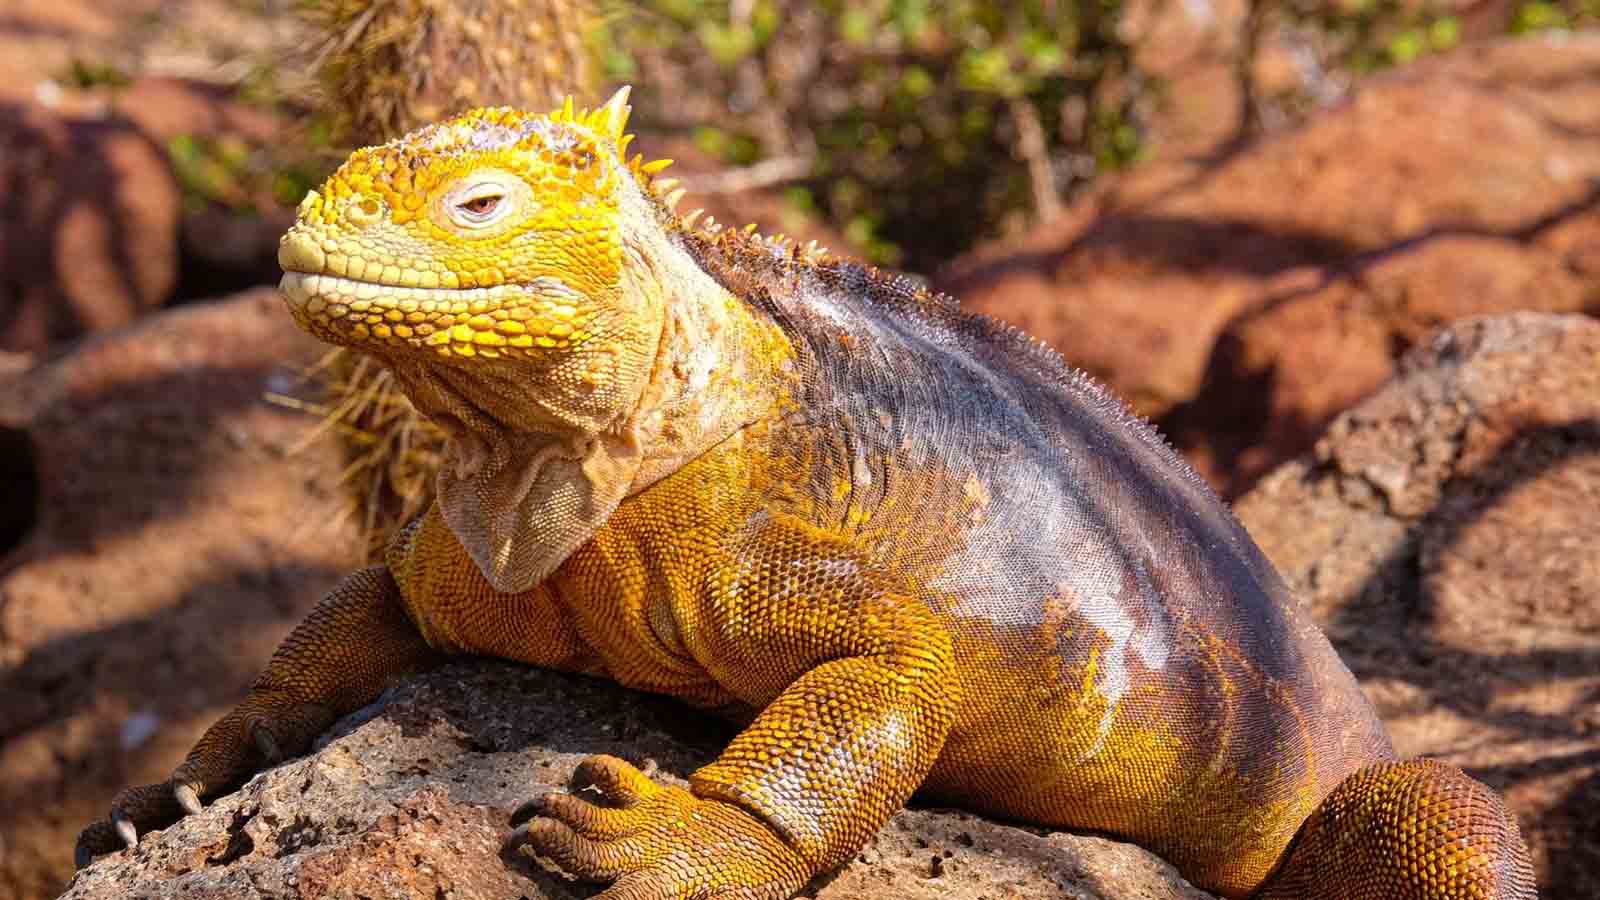 Land Iguana | When is the best time to visit Galapagos